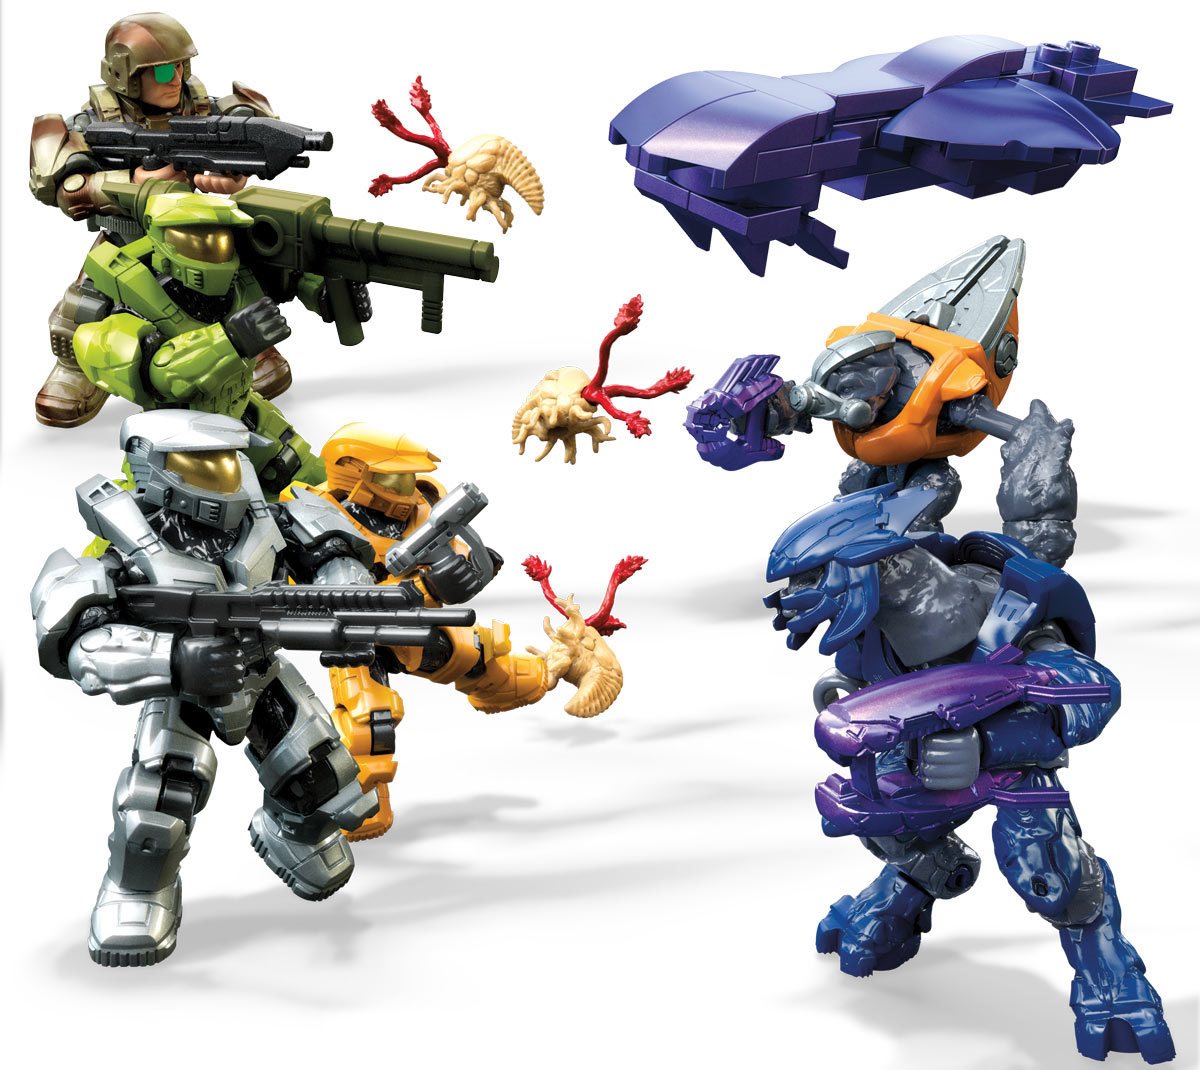 halo 1 action figures